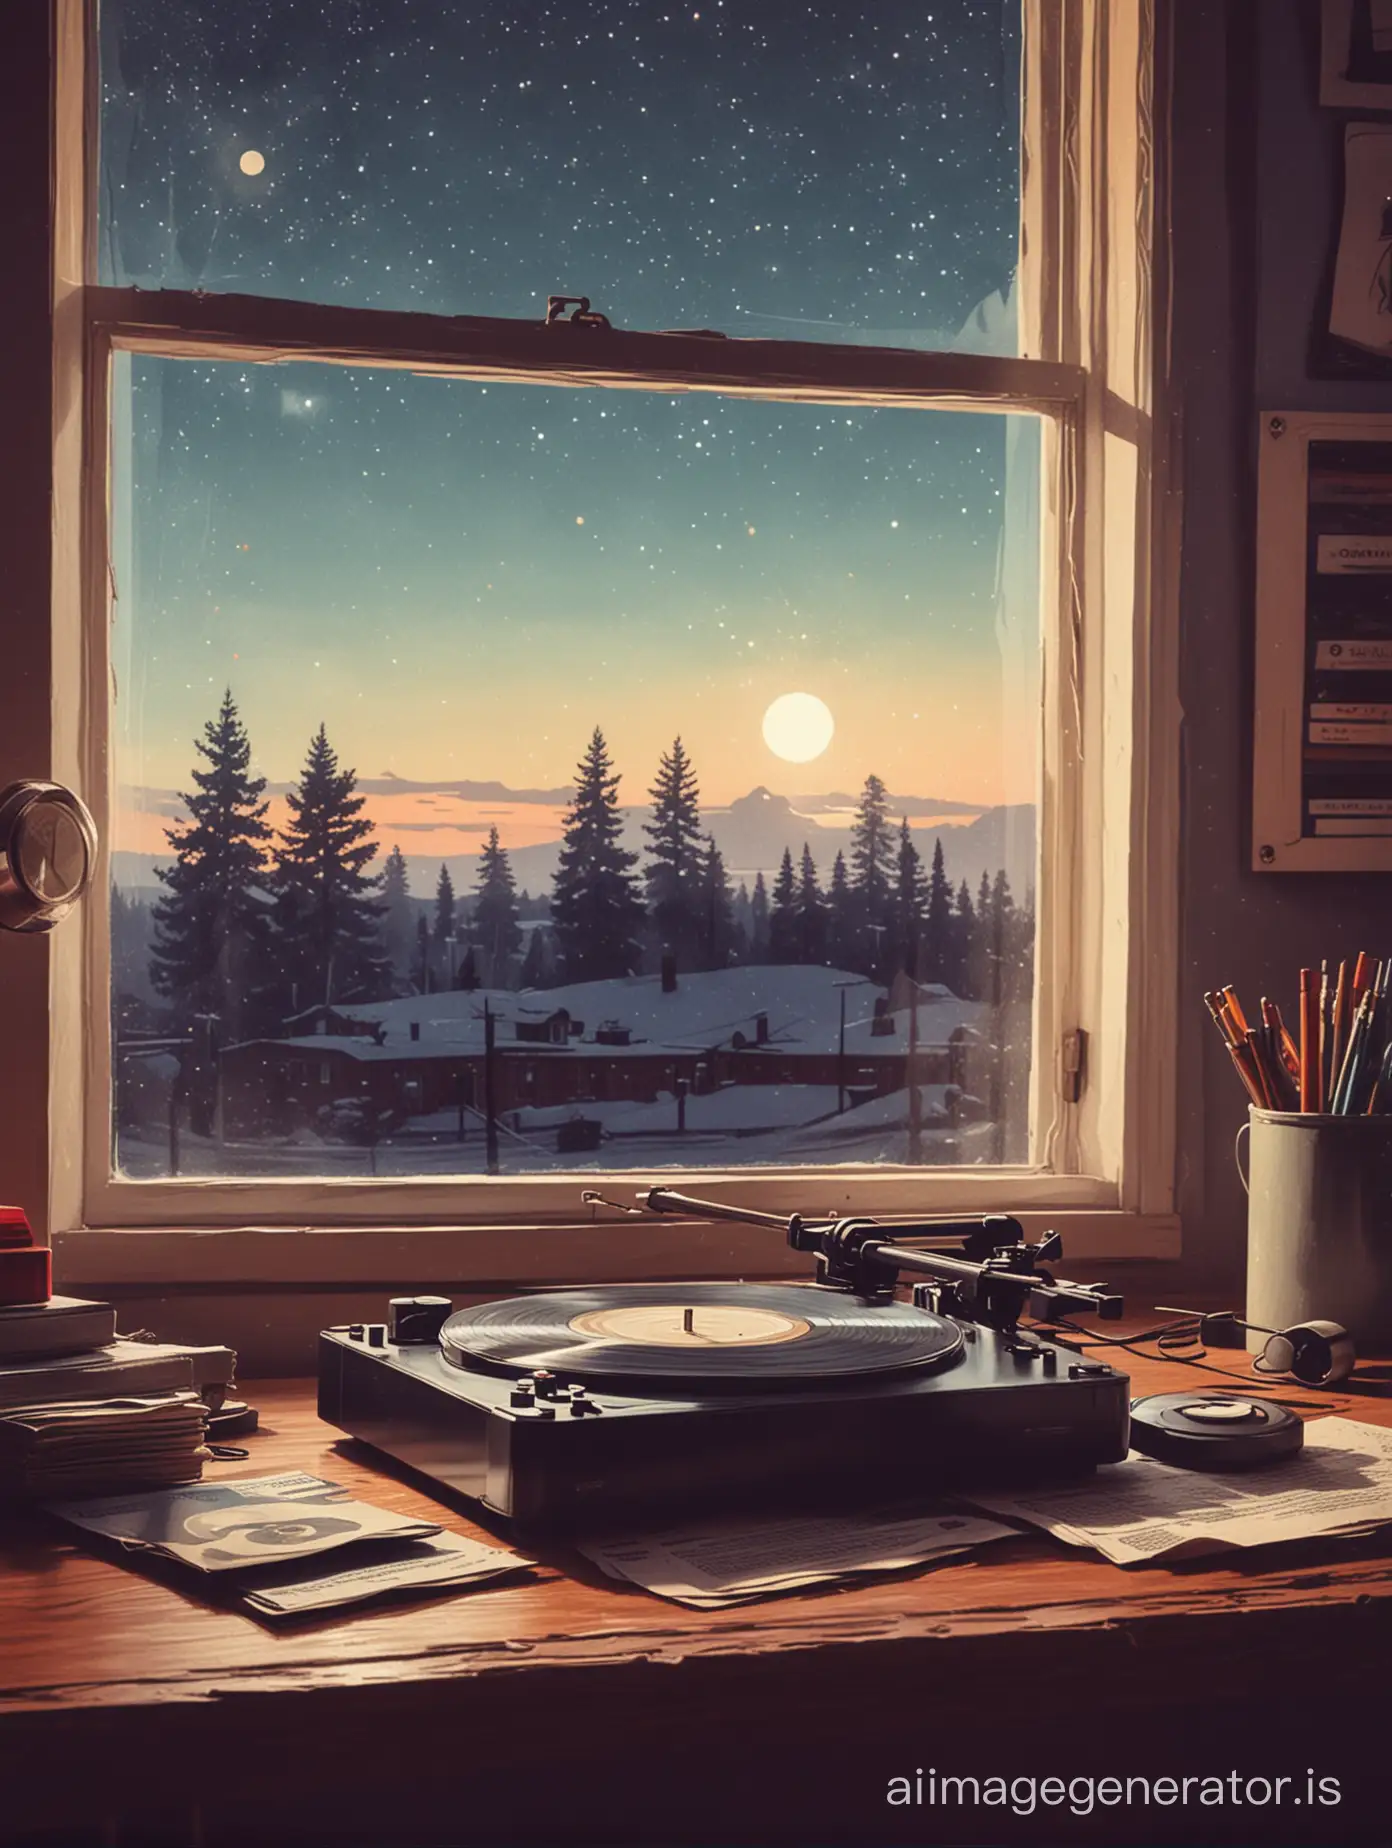 A vinyl player near a window on a desk,, a slight illustration style, in the late evening, the night sky peeking through the window, in the style of a communist poster